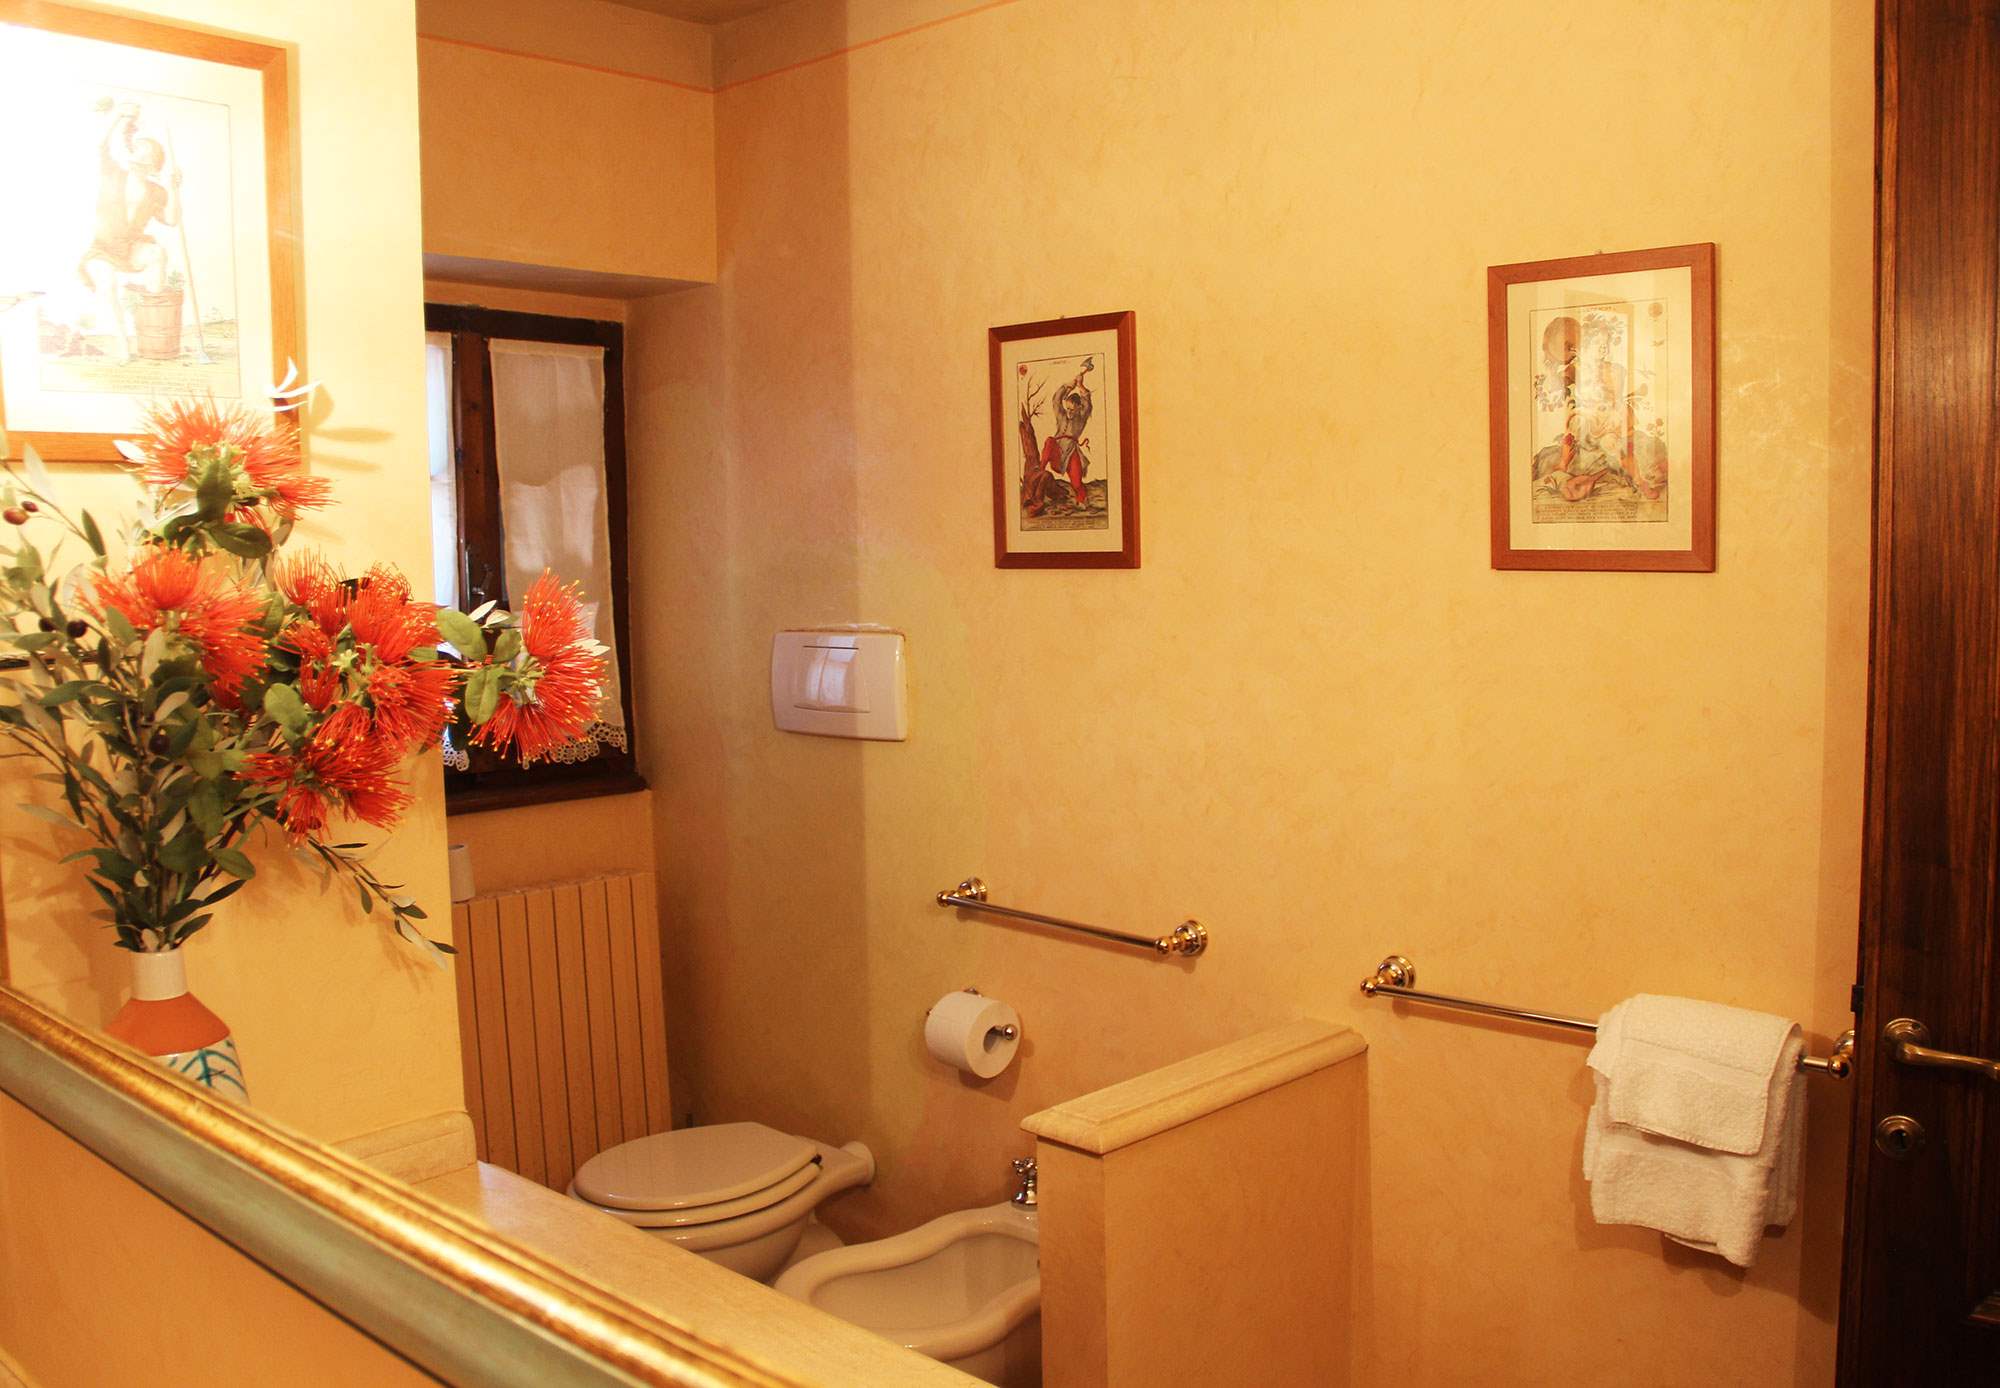 Villa Felicita, Main house and apartment, 10 persons rate, 5 bedroom villa in Chianti & Countryside, Tuscany Photo #22